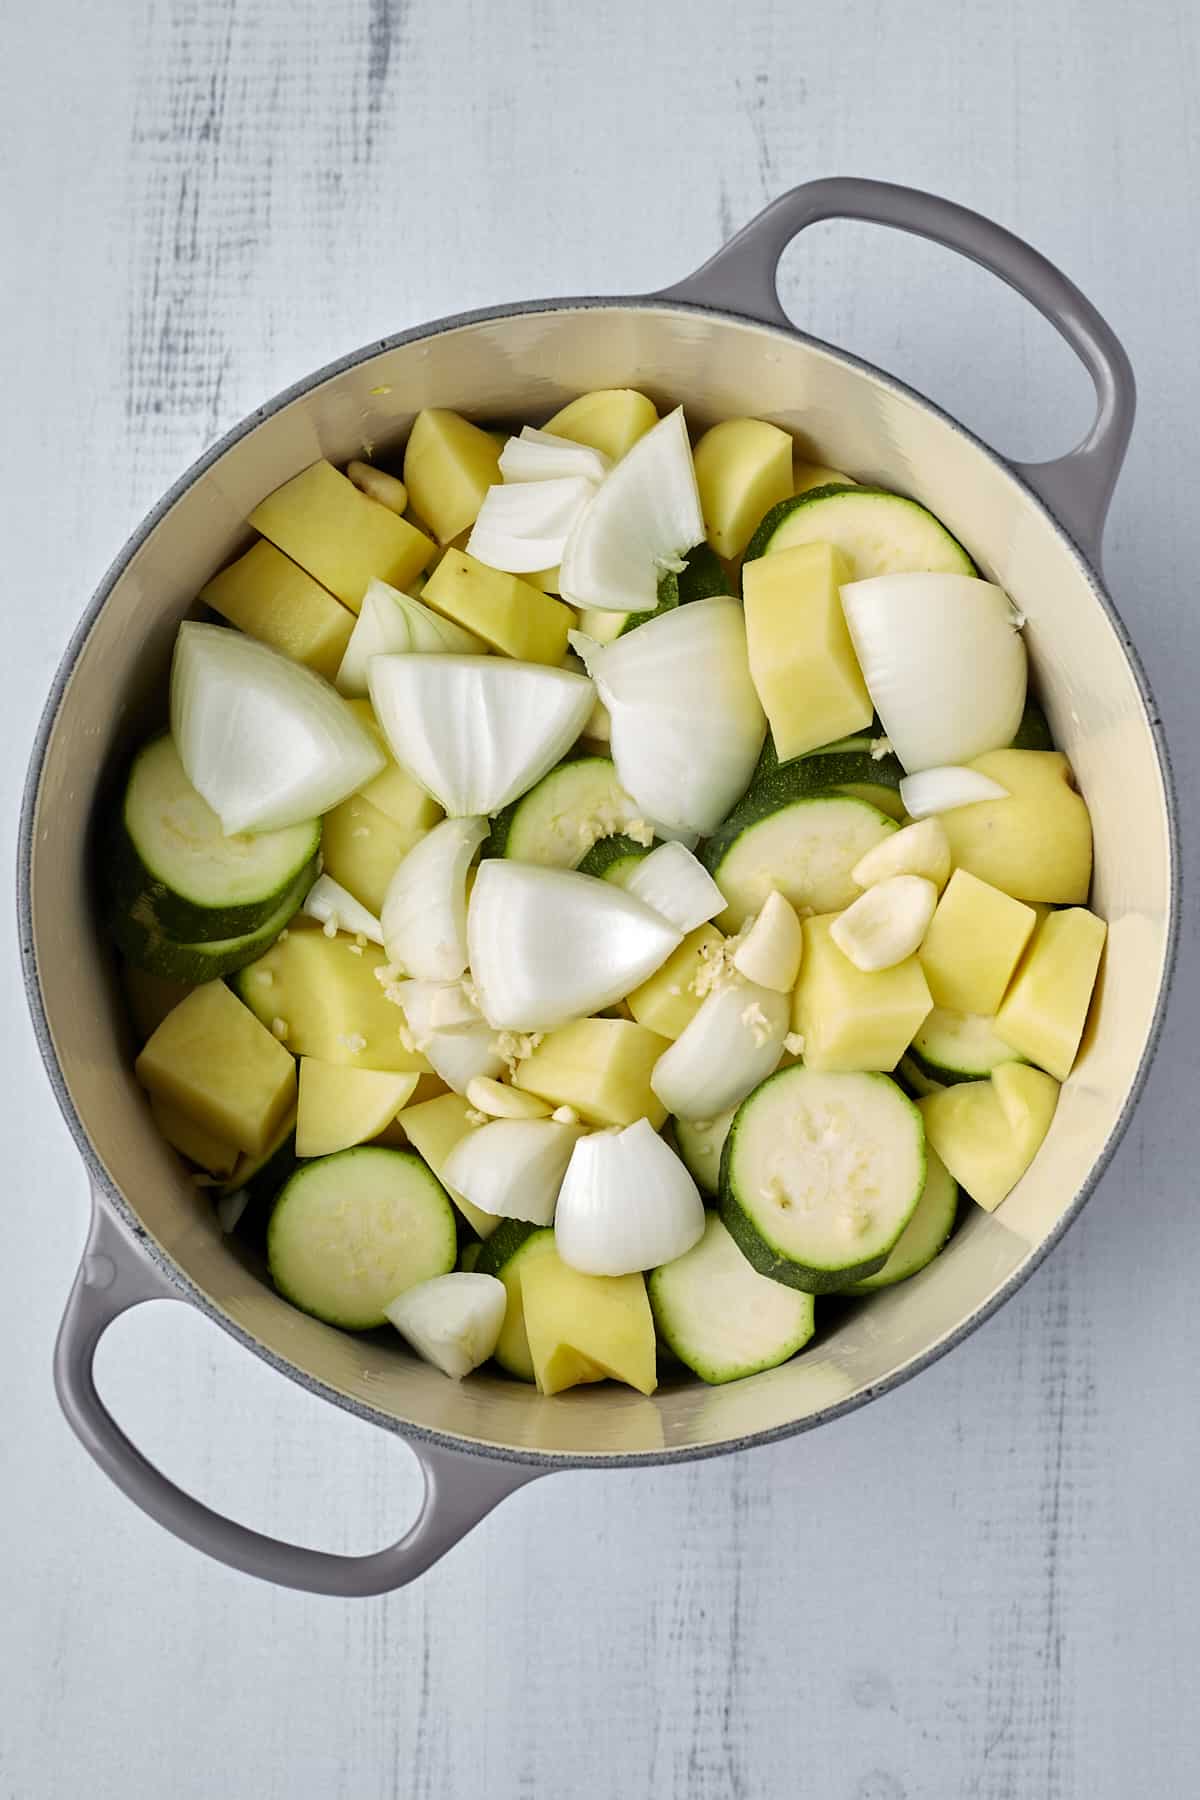 onions, zucchini, potatoes, and garlic in a large pot.